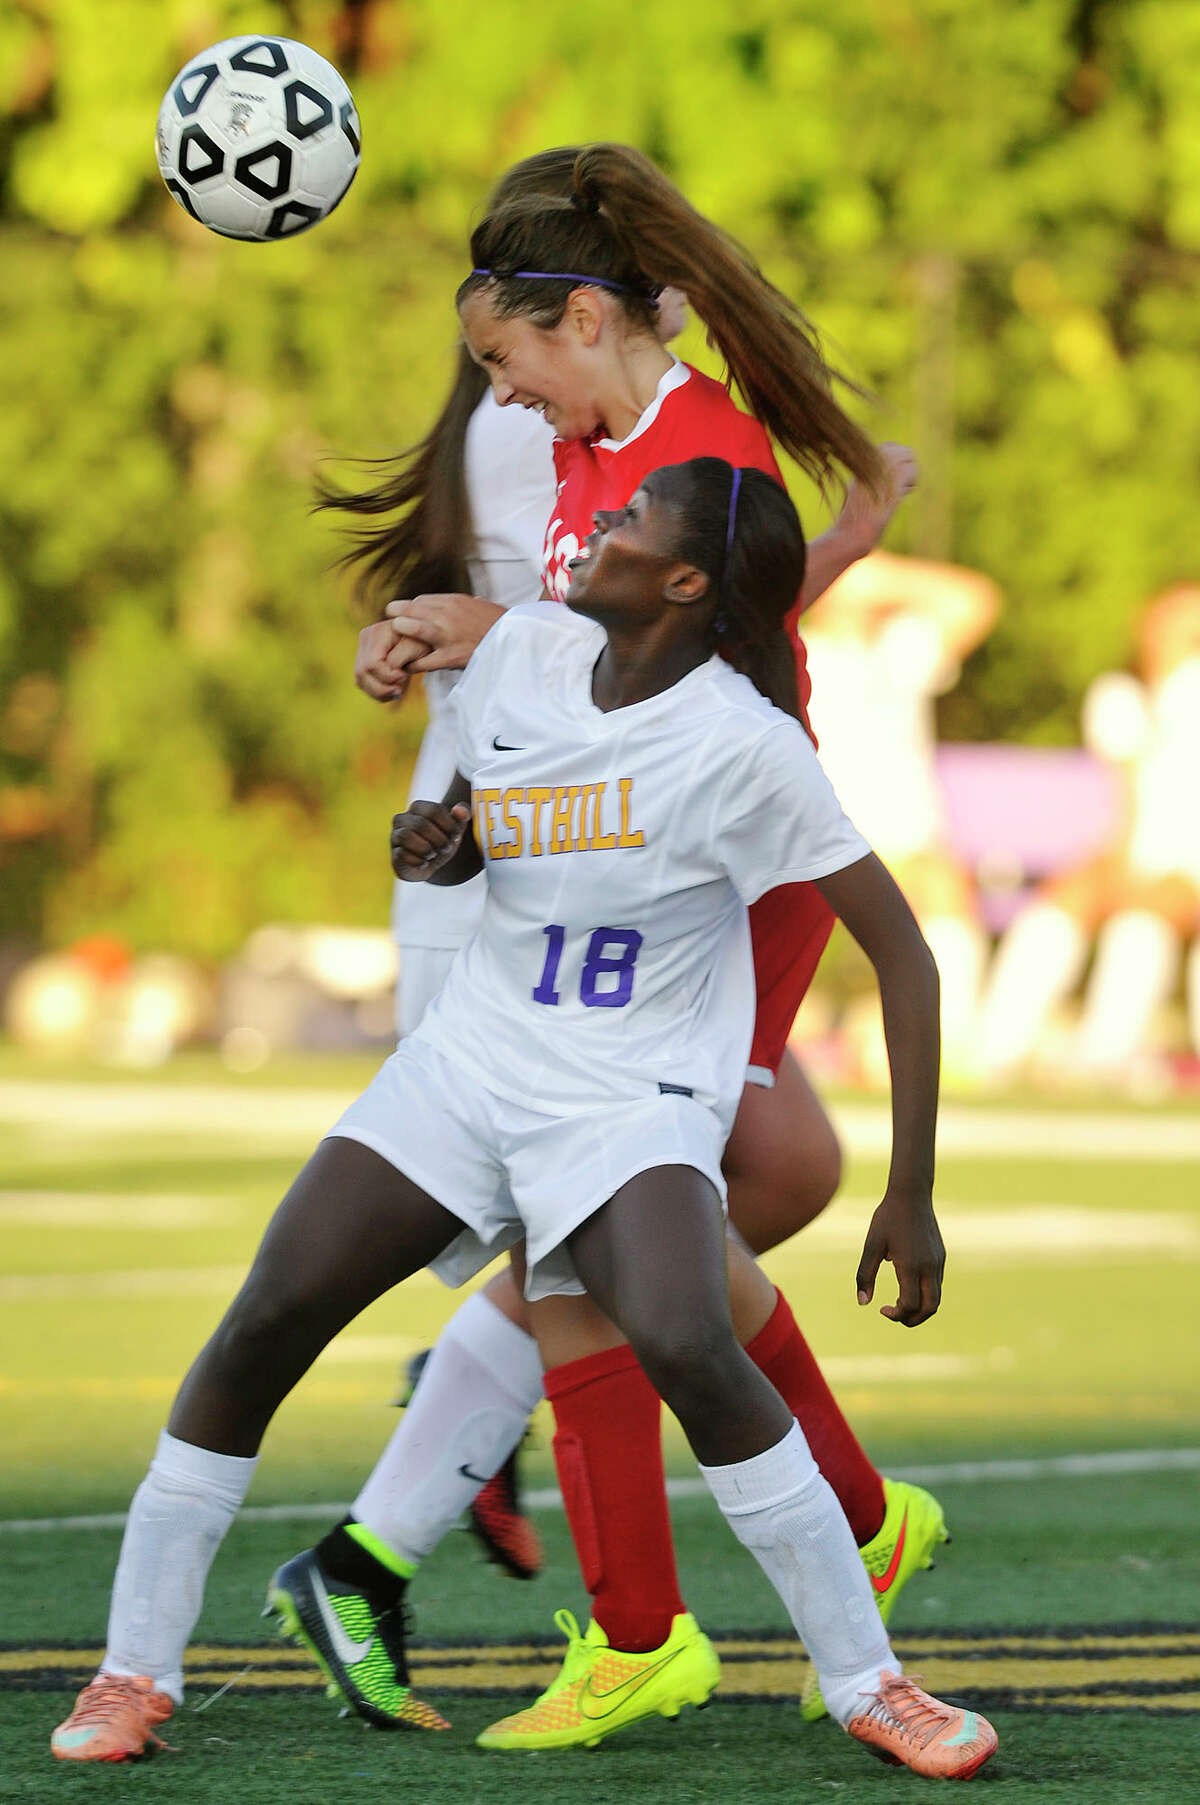 Westhill's Chelsea Domond and Greenwich's Katherine Doyle compete for the header during their game at Westhill High School in Stamford, Conn., on Wednesday, Sept. 17, 2014. Westhill won, 2-1.